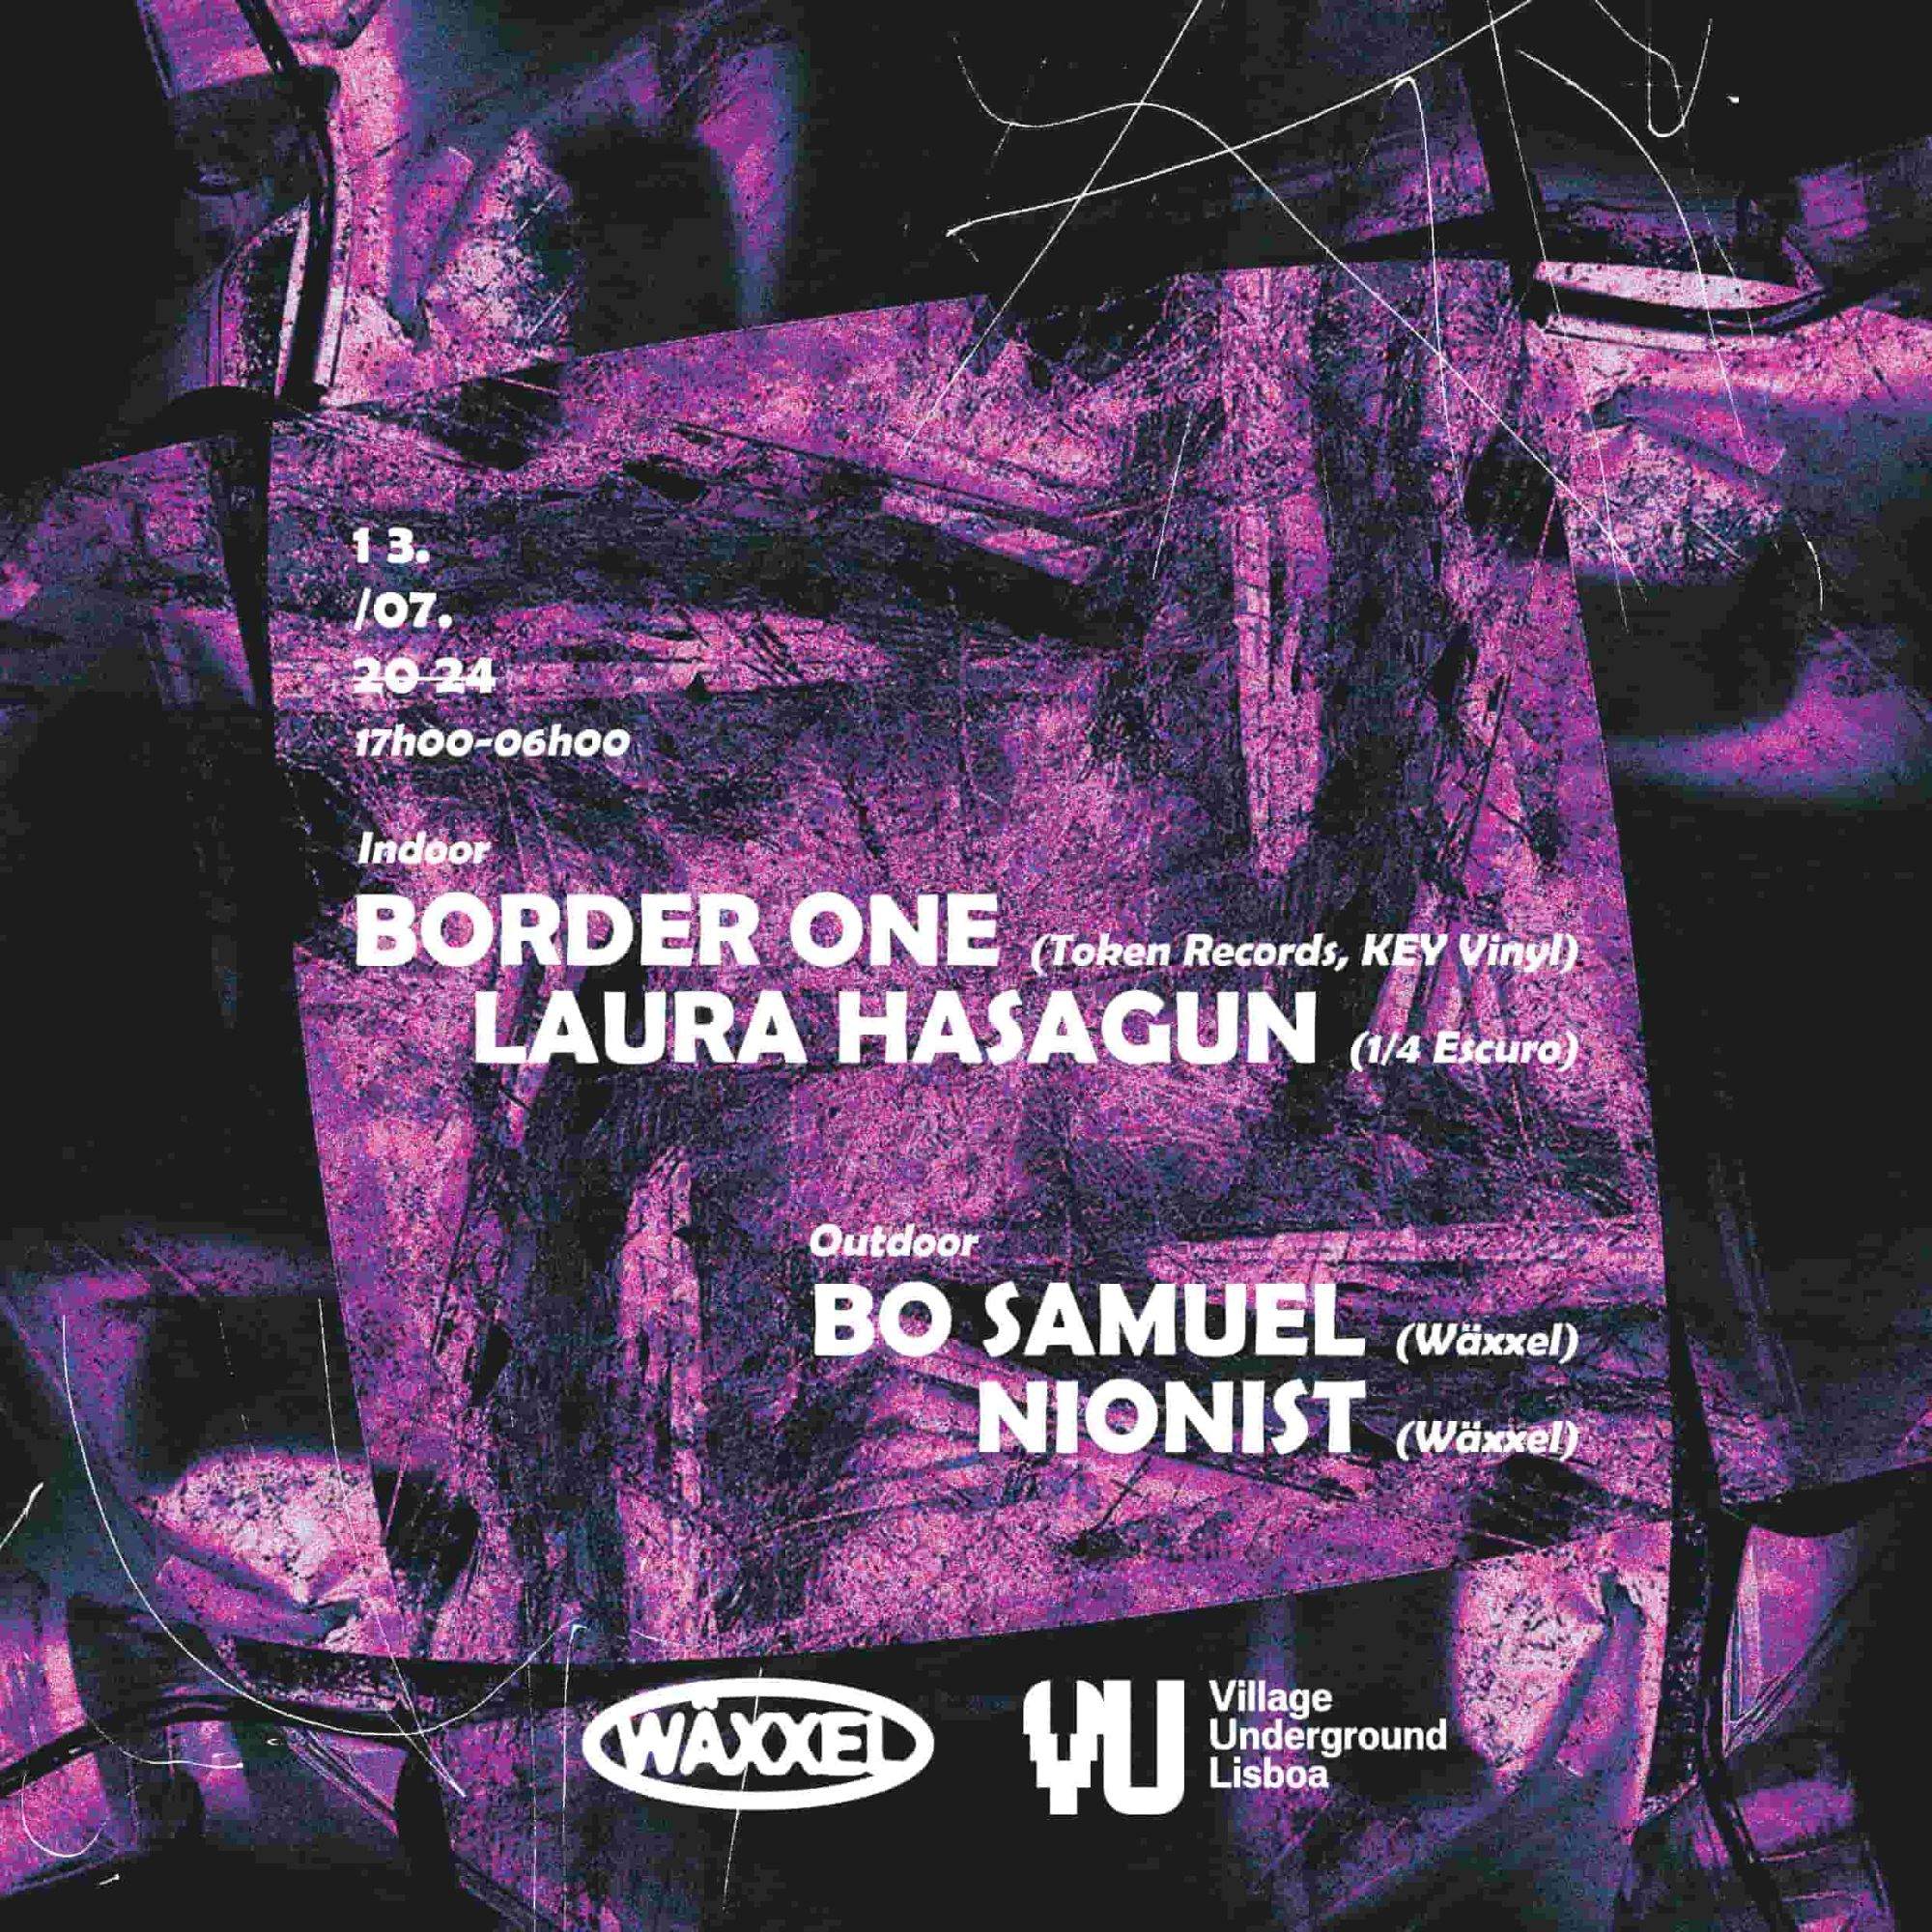 Wäxxel Day & Night with Border One & Laura Hasagun - フライヤー表